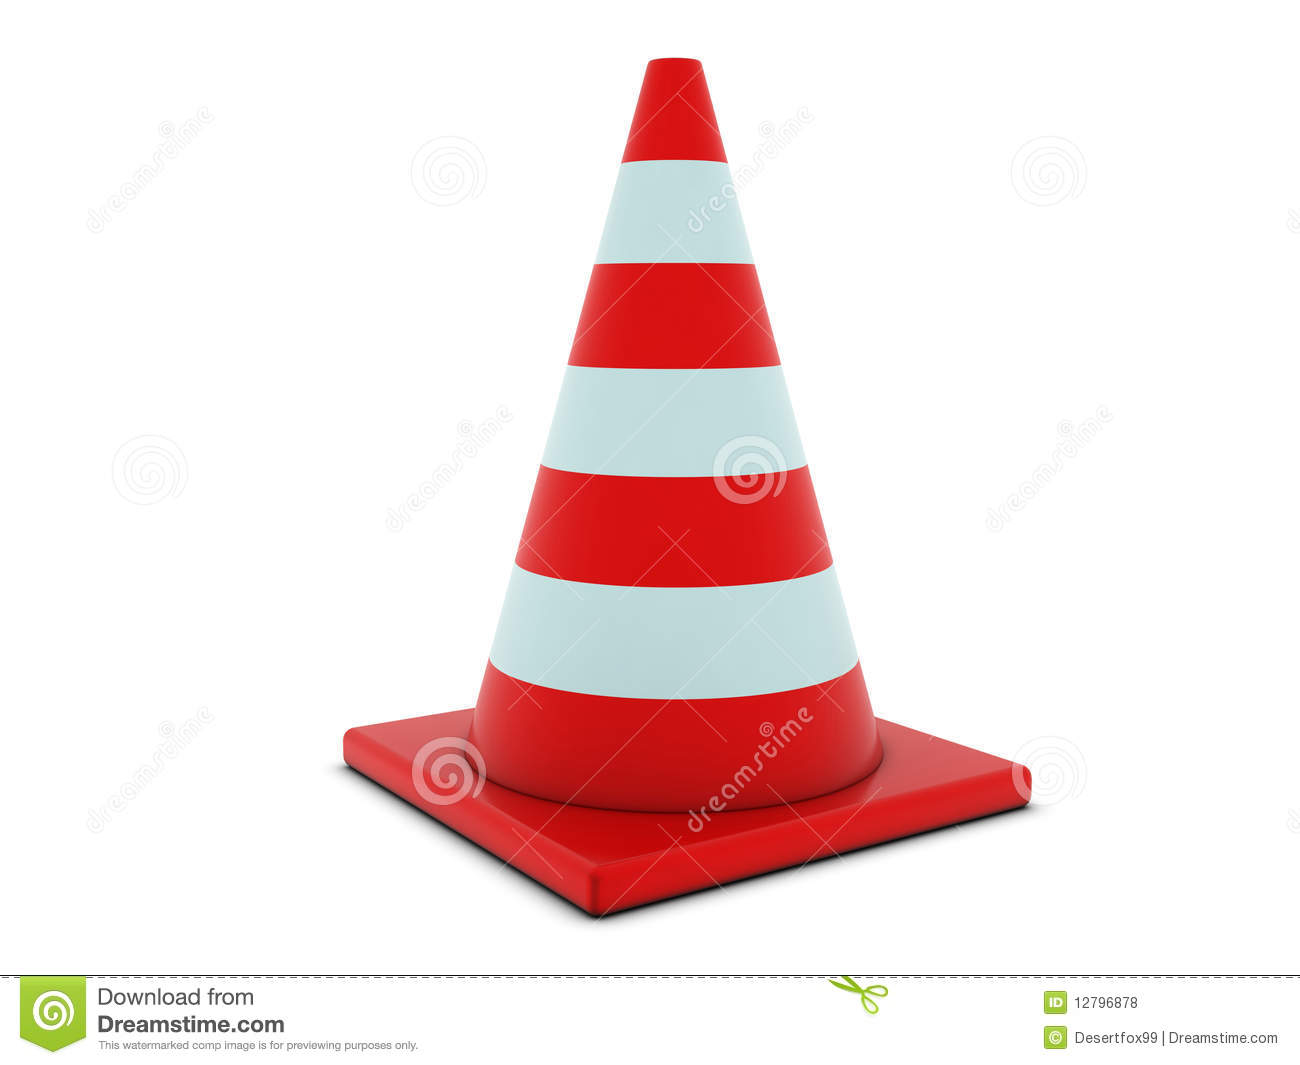 Traffic Cone Royalty Free Stock Photos   Image  12796878